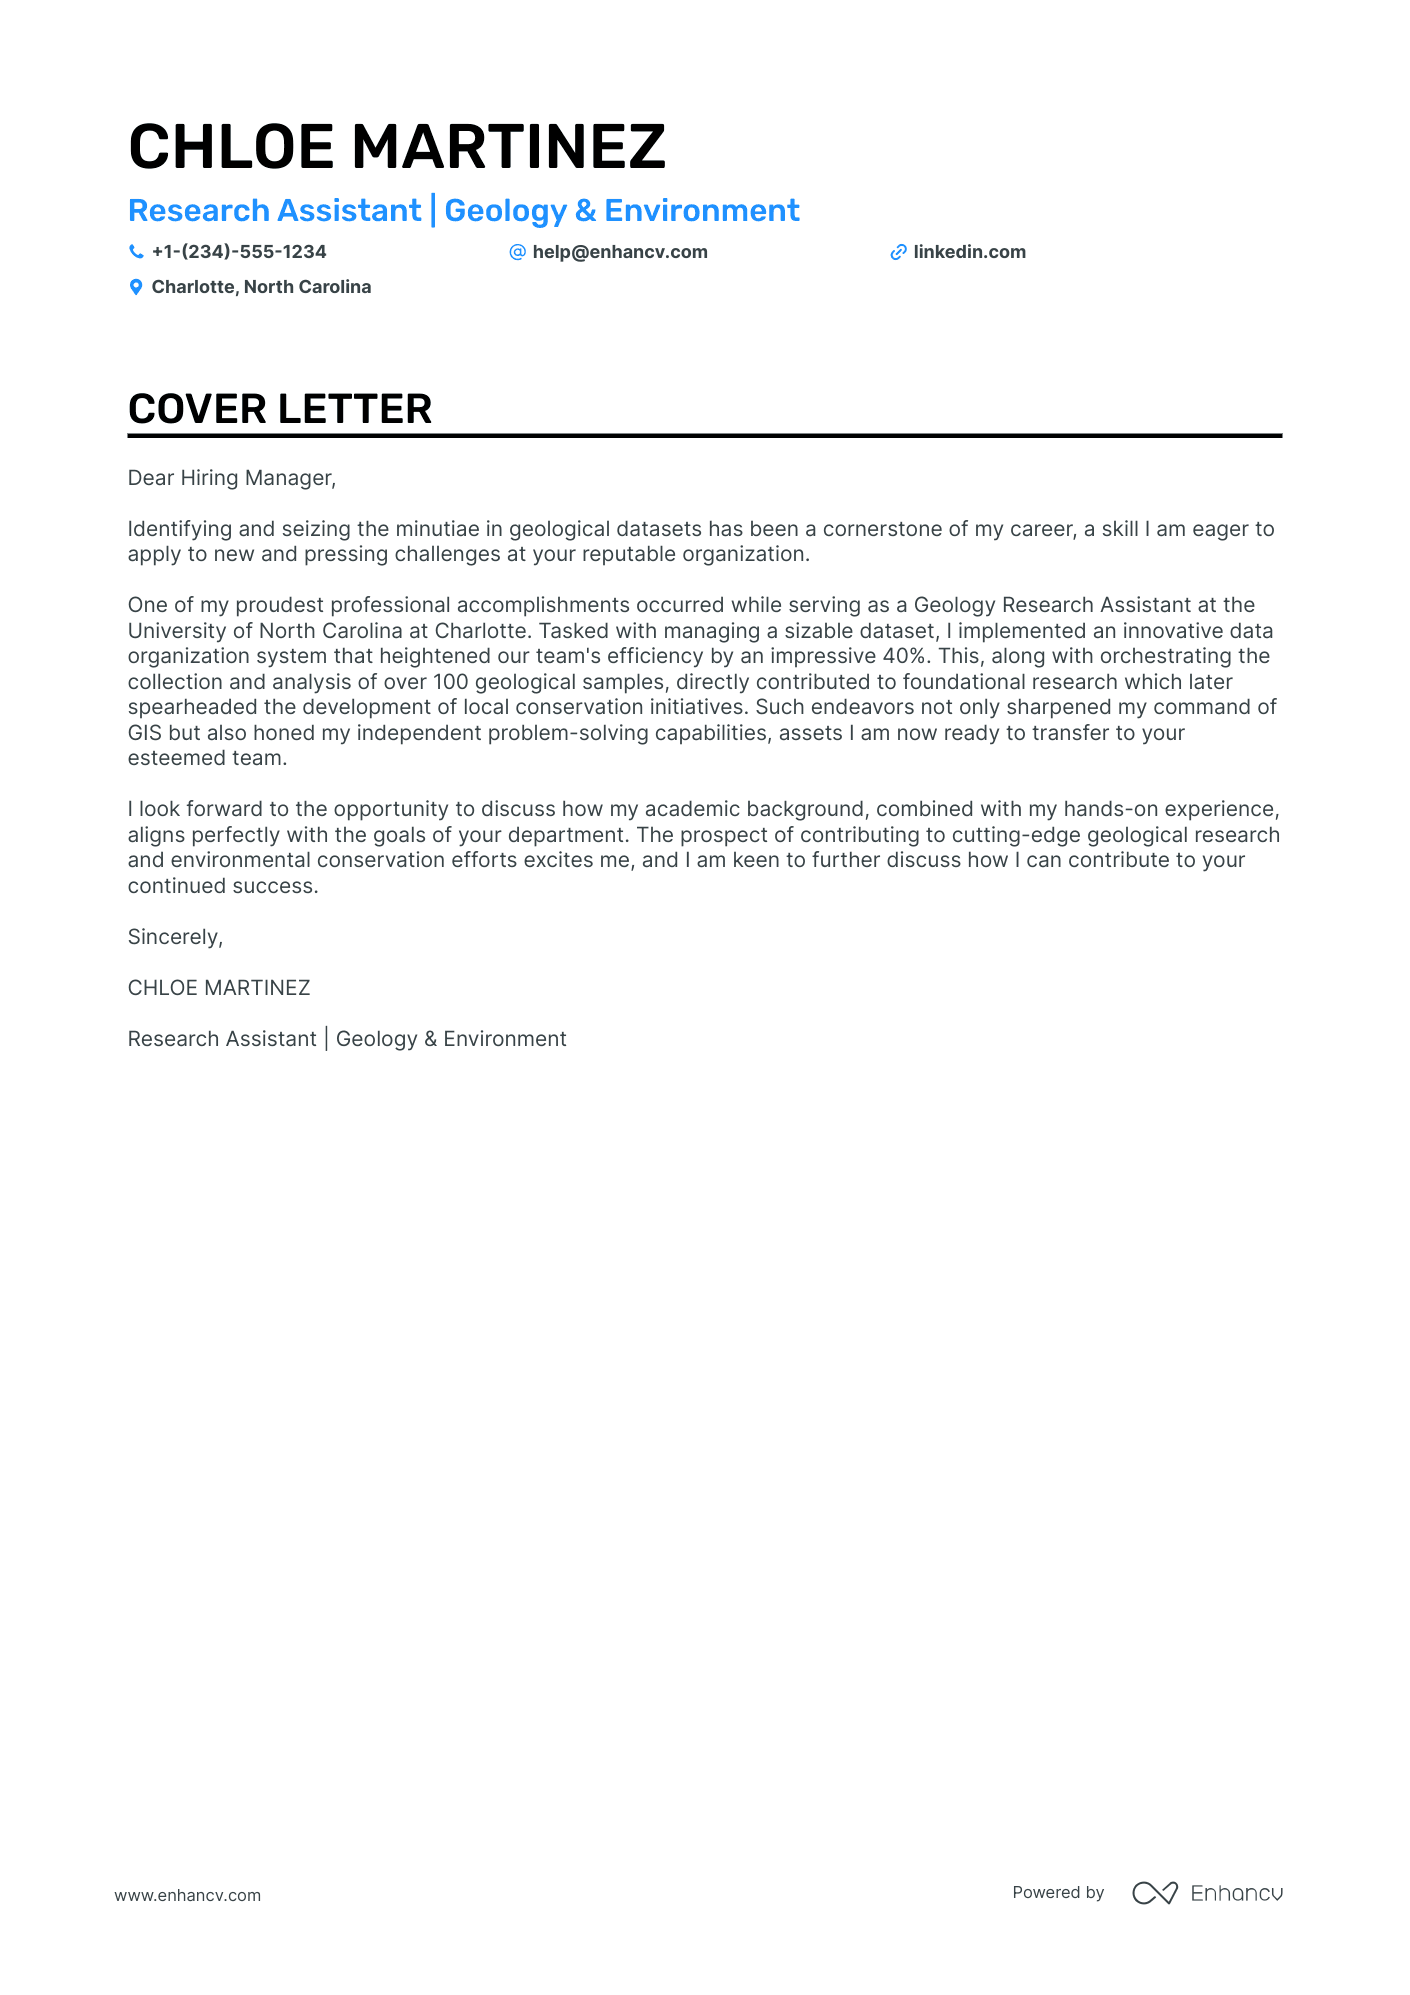 cover letter sample for research assistant role